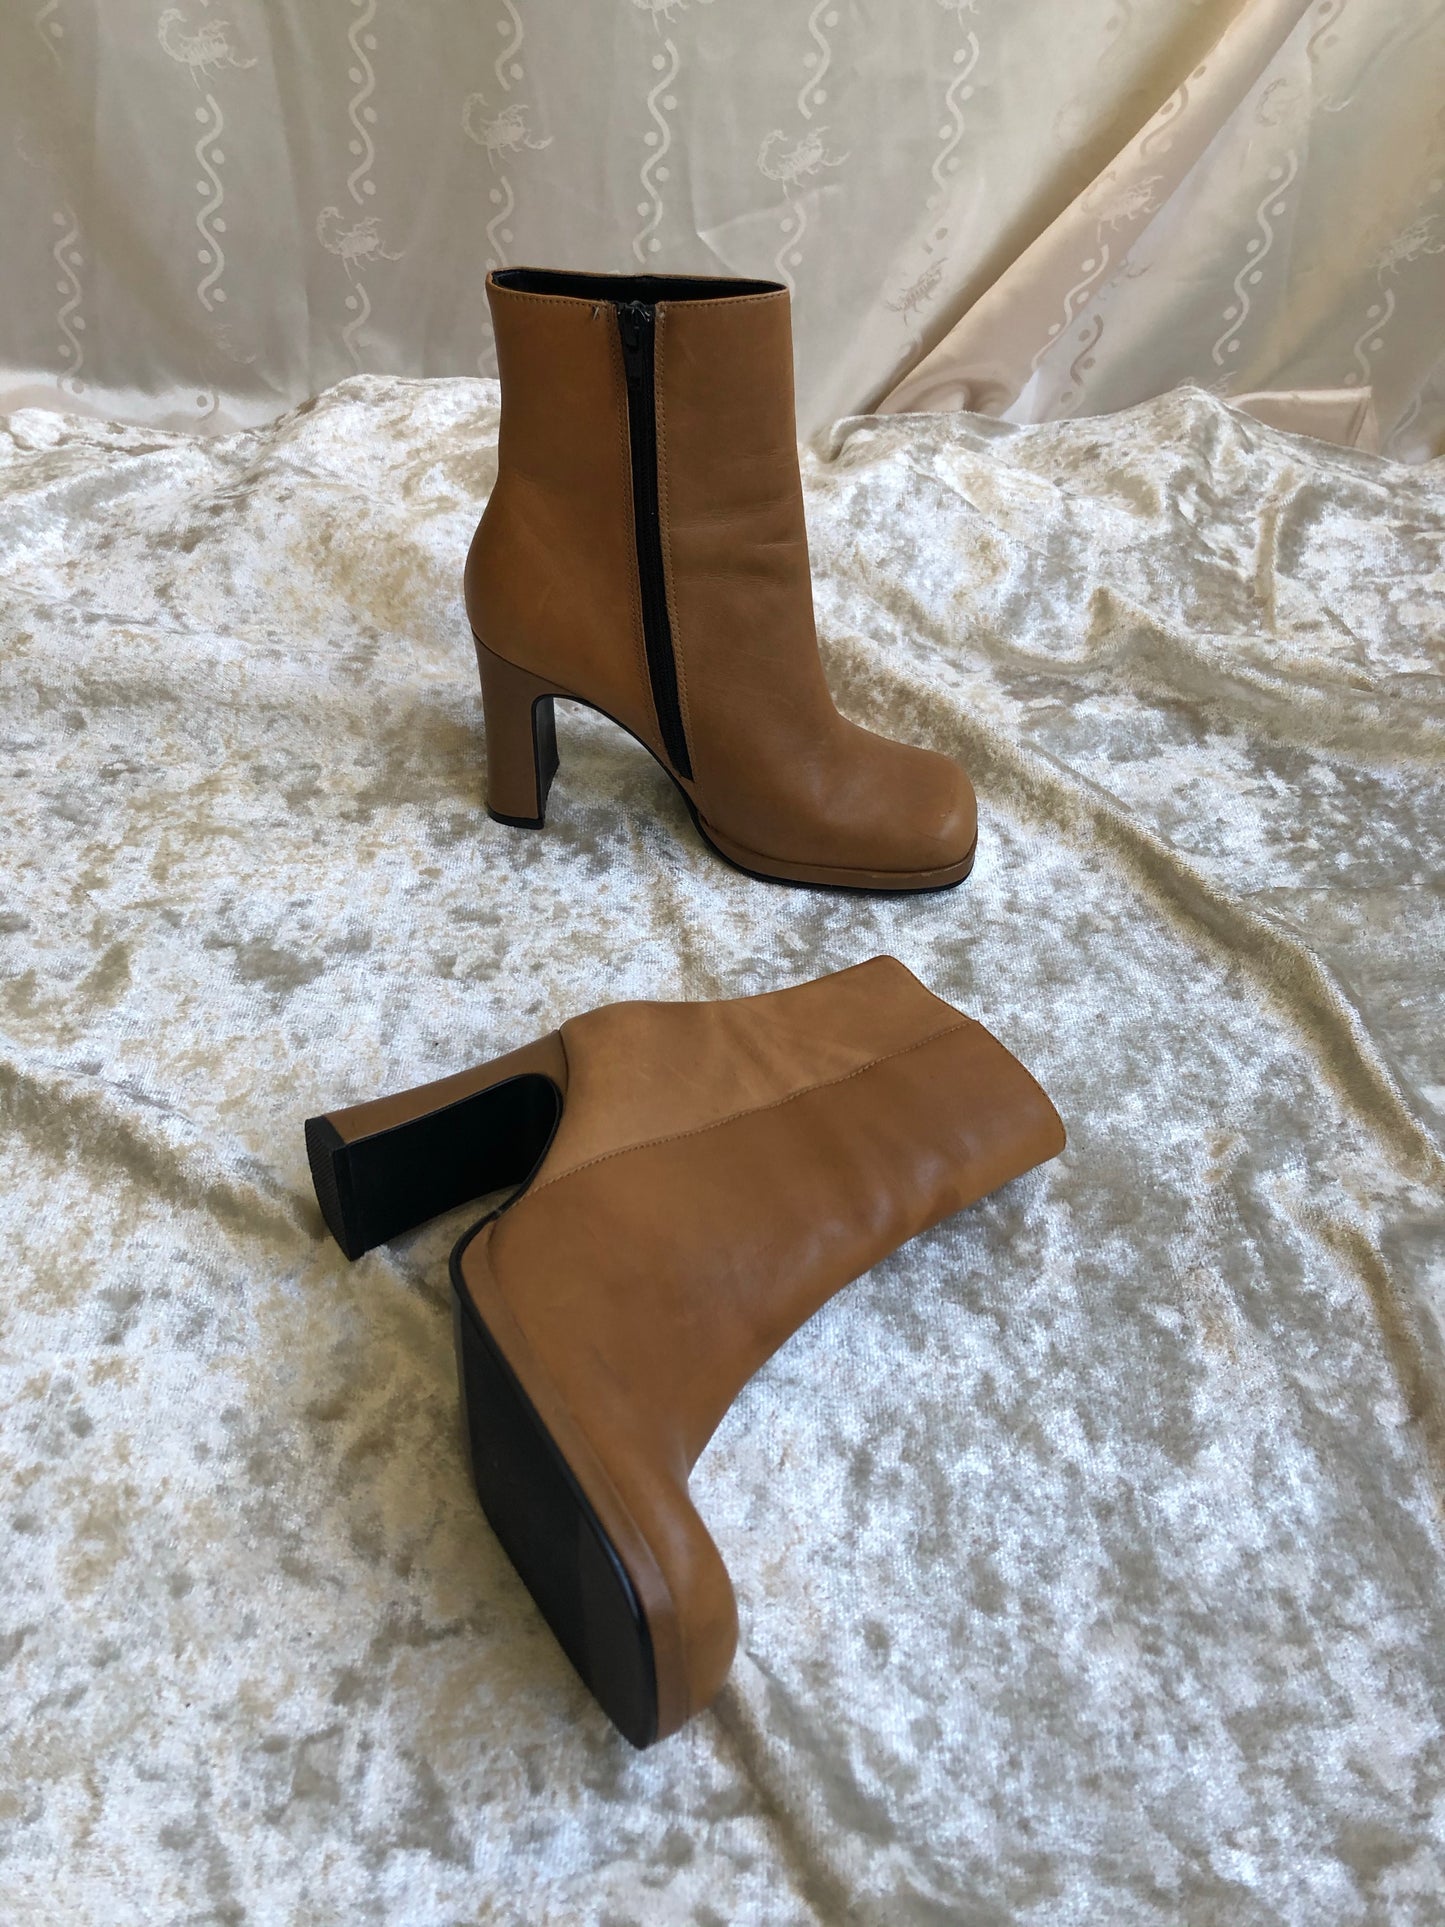 Camel Square Toe Booties / 7